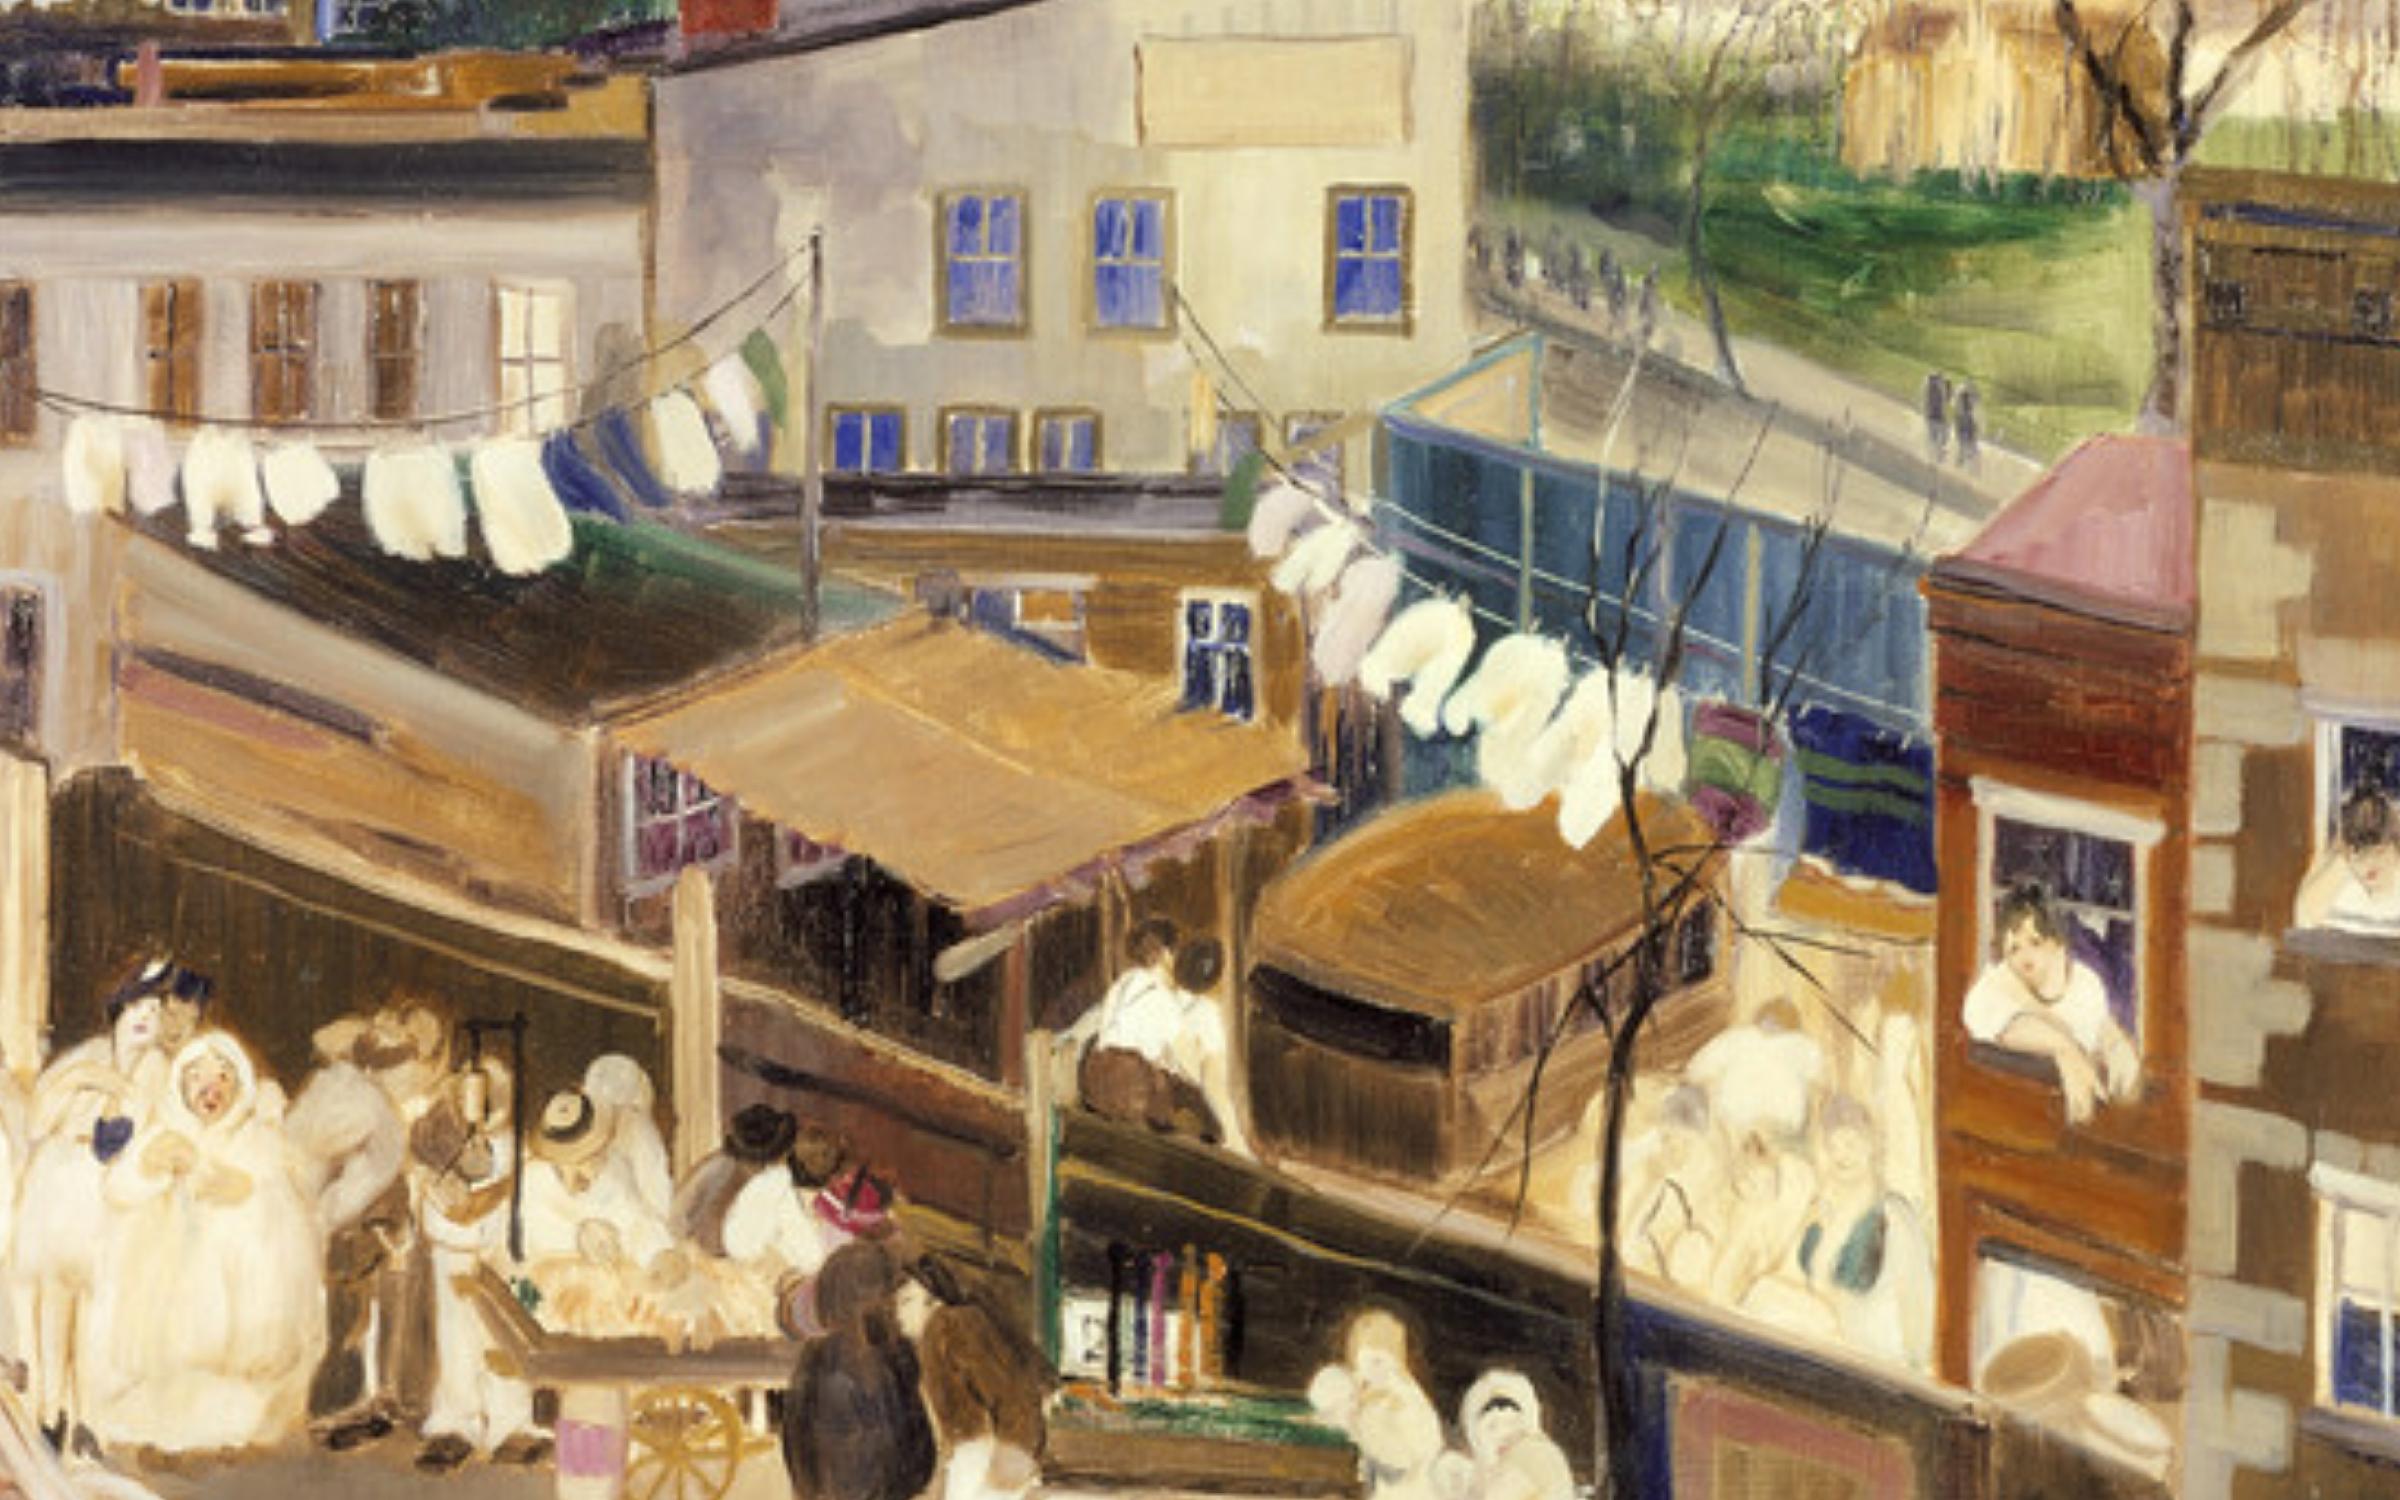 A painting of a busy street. Laundry hangs on drying lines, vendors line the road, and people lean out of windows.